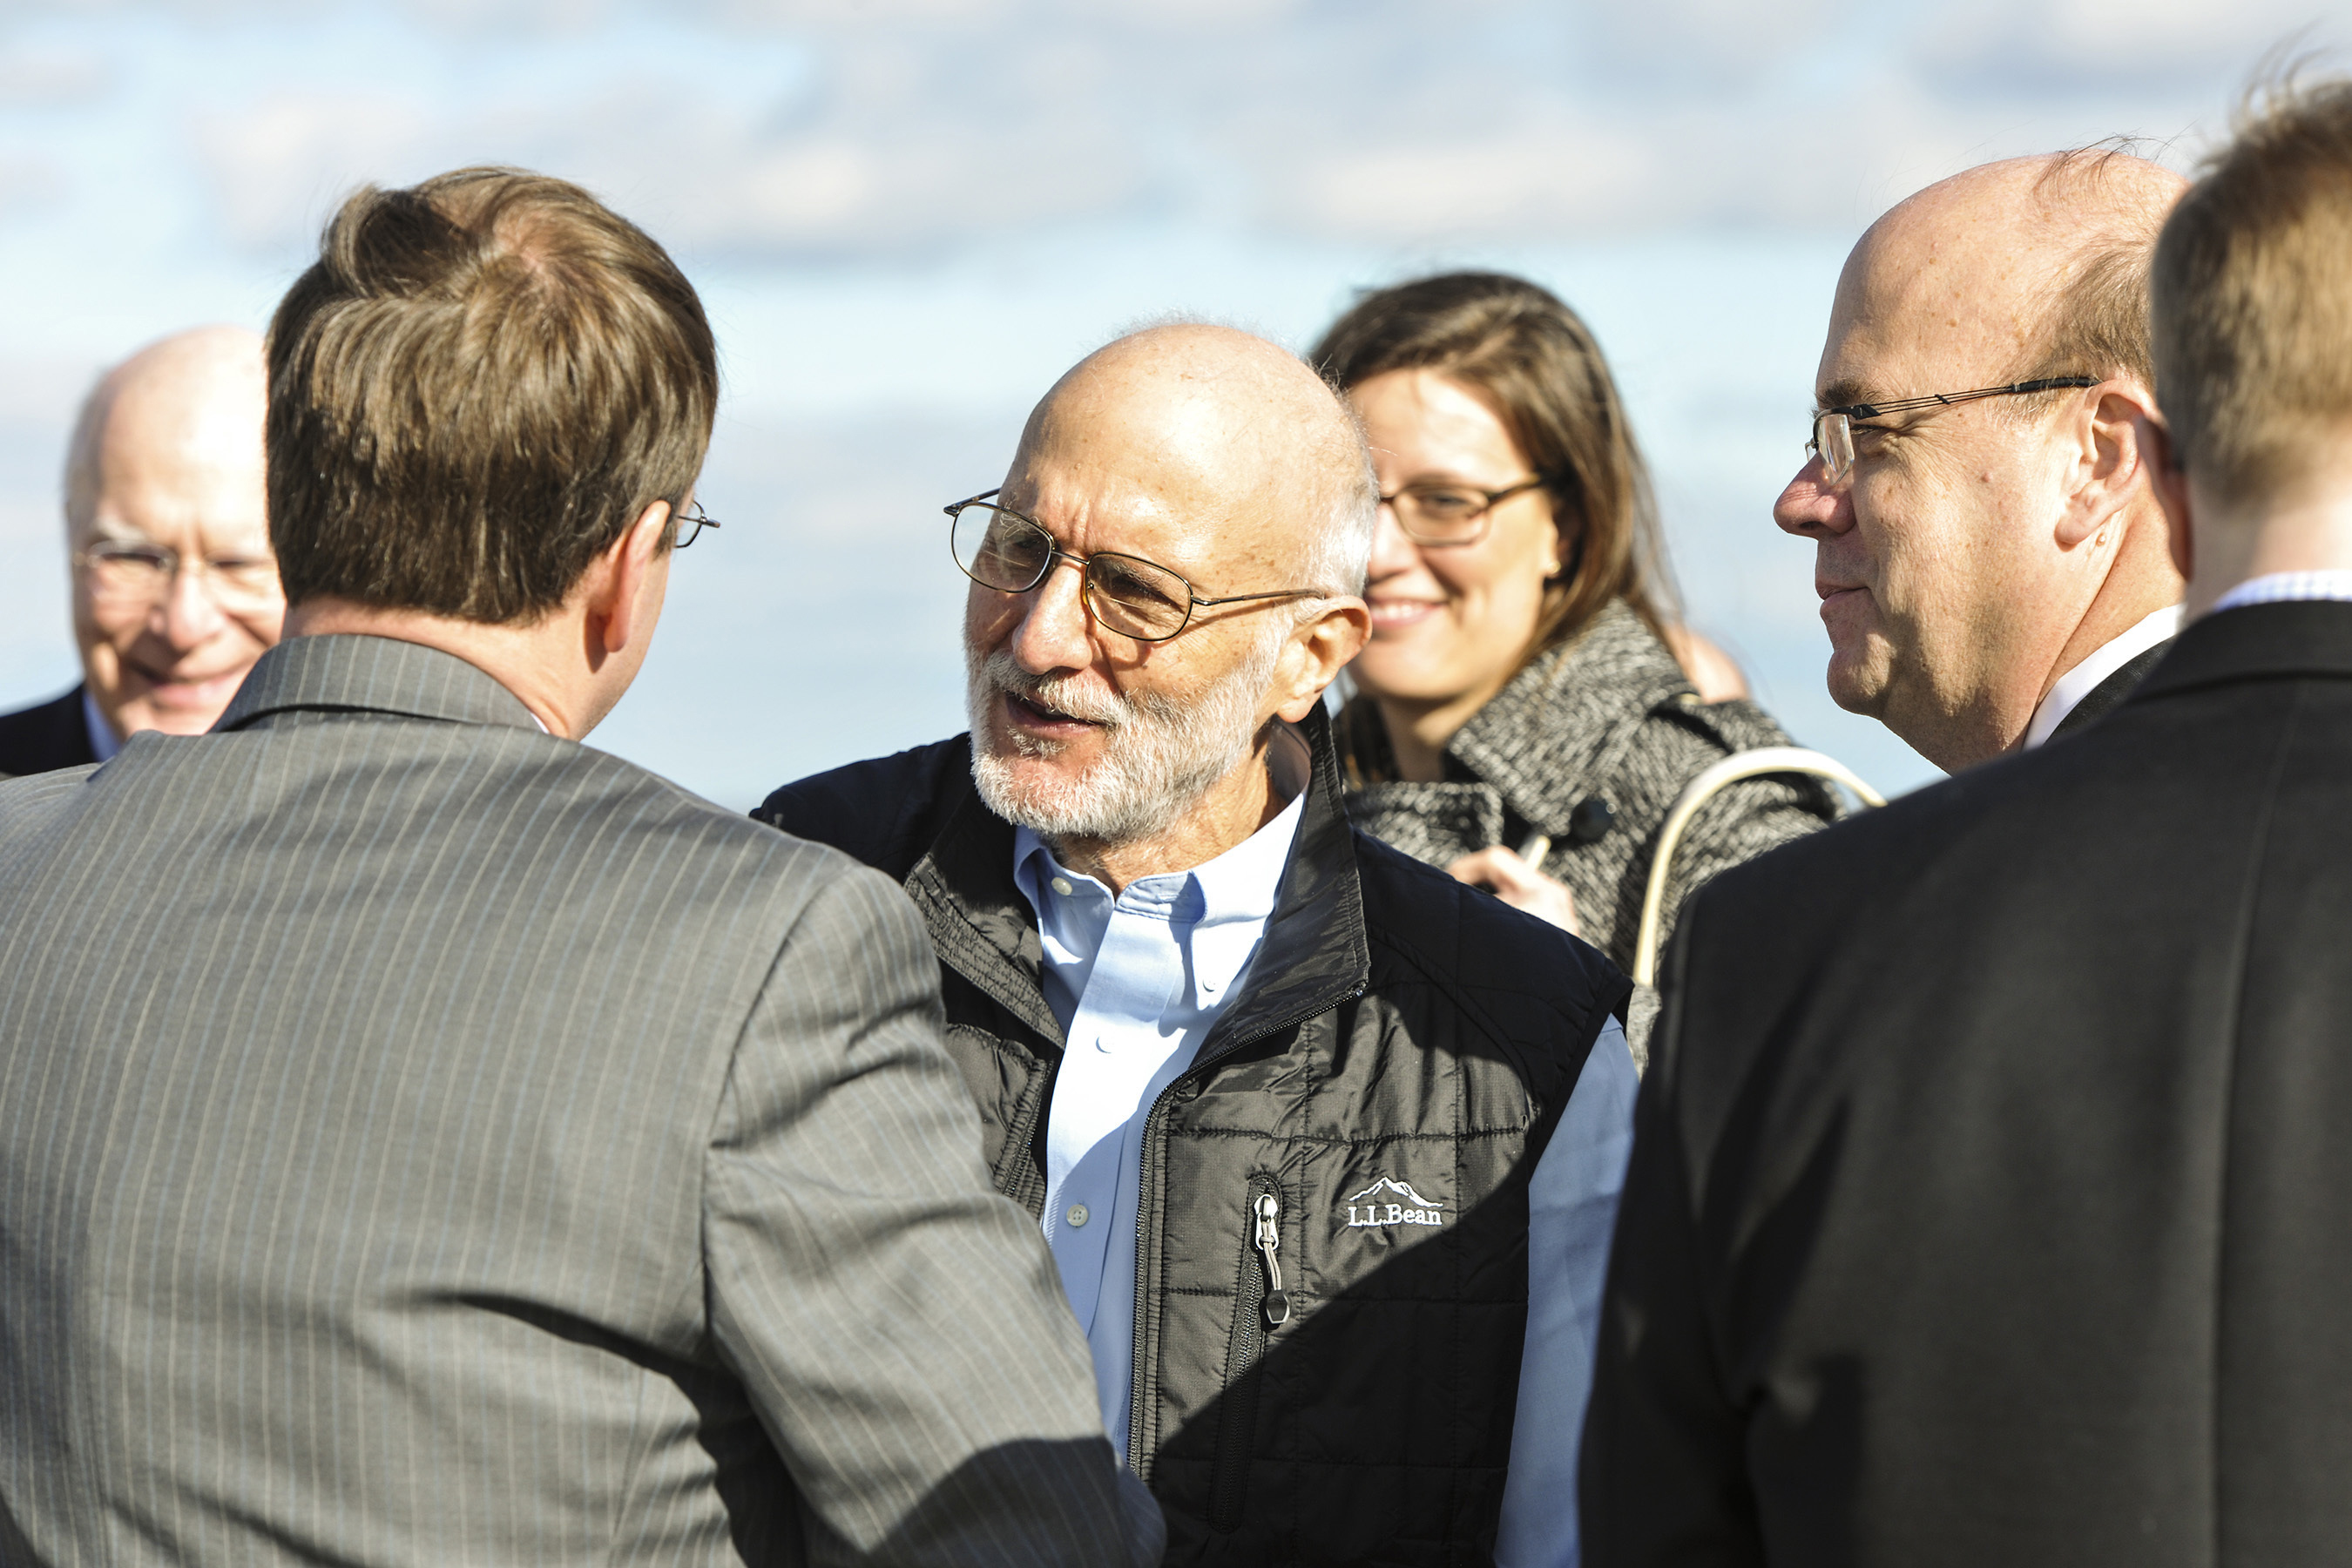 Alan Gross speaks to an entourage of family and friends who were awaiting his return from five years of captivity in Cuba to Joint Base Andrews, Maryland, Dec. 17, 2014 (Reuters)